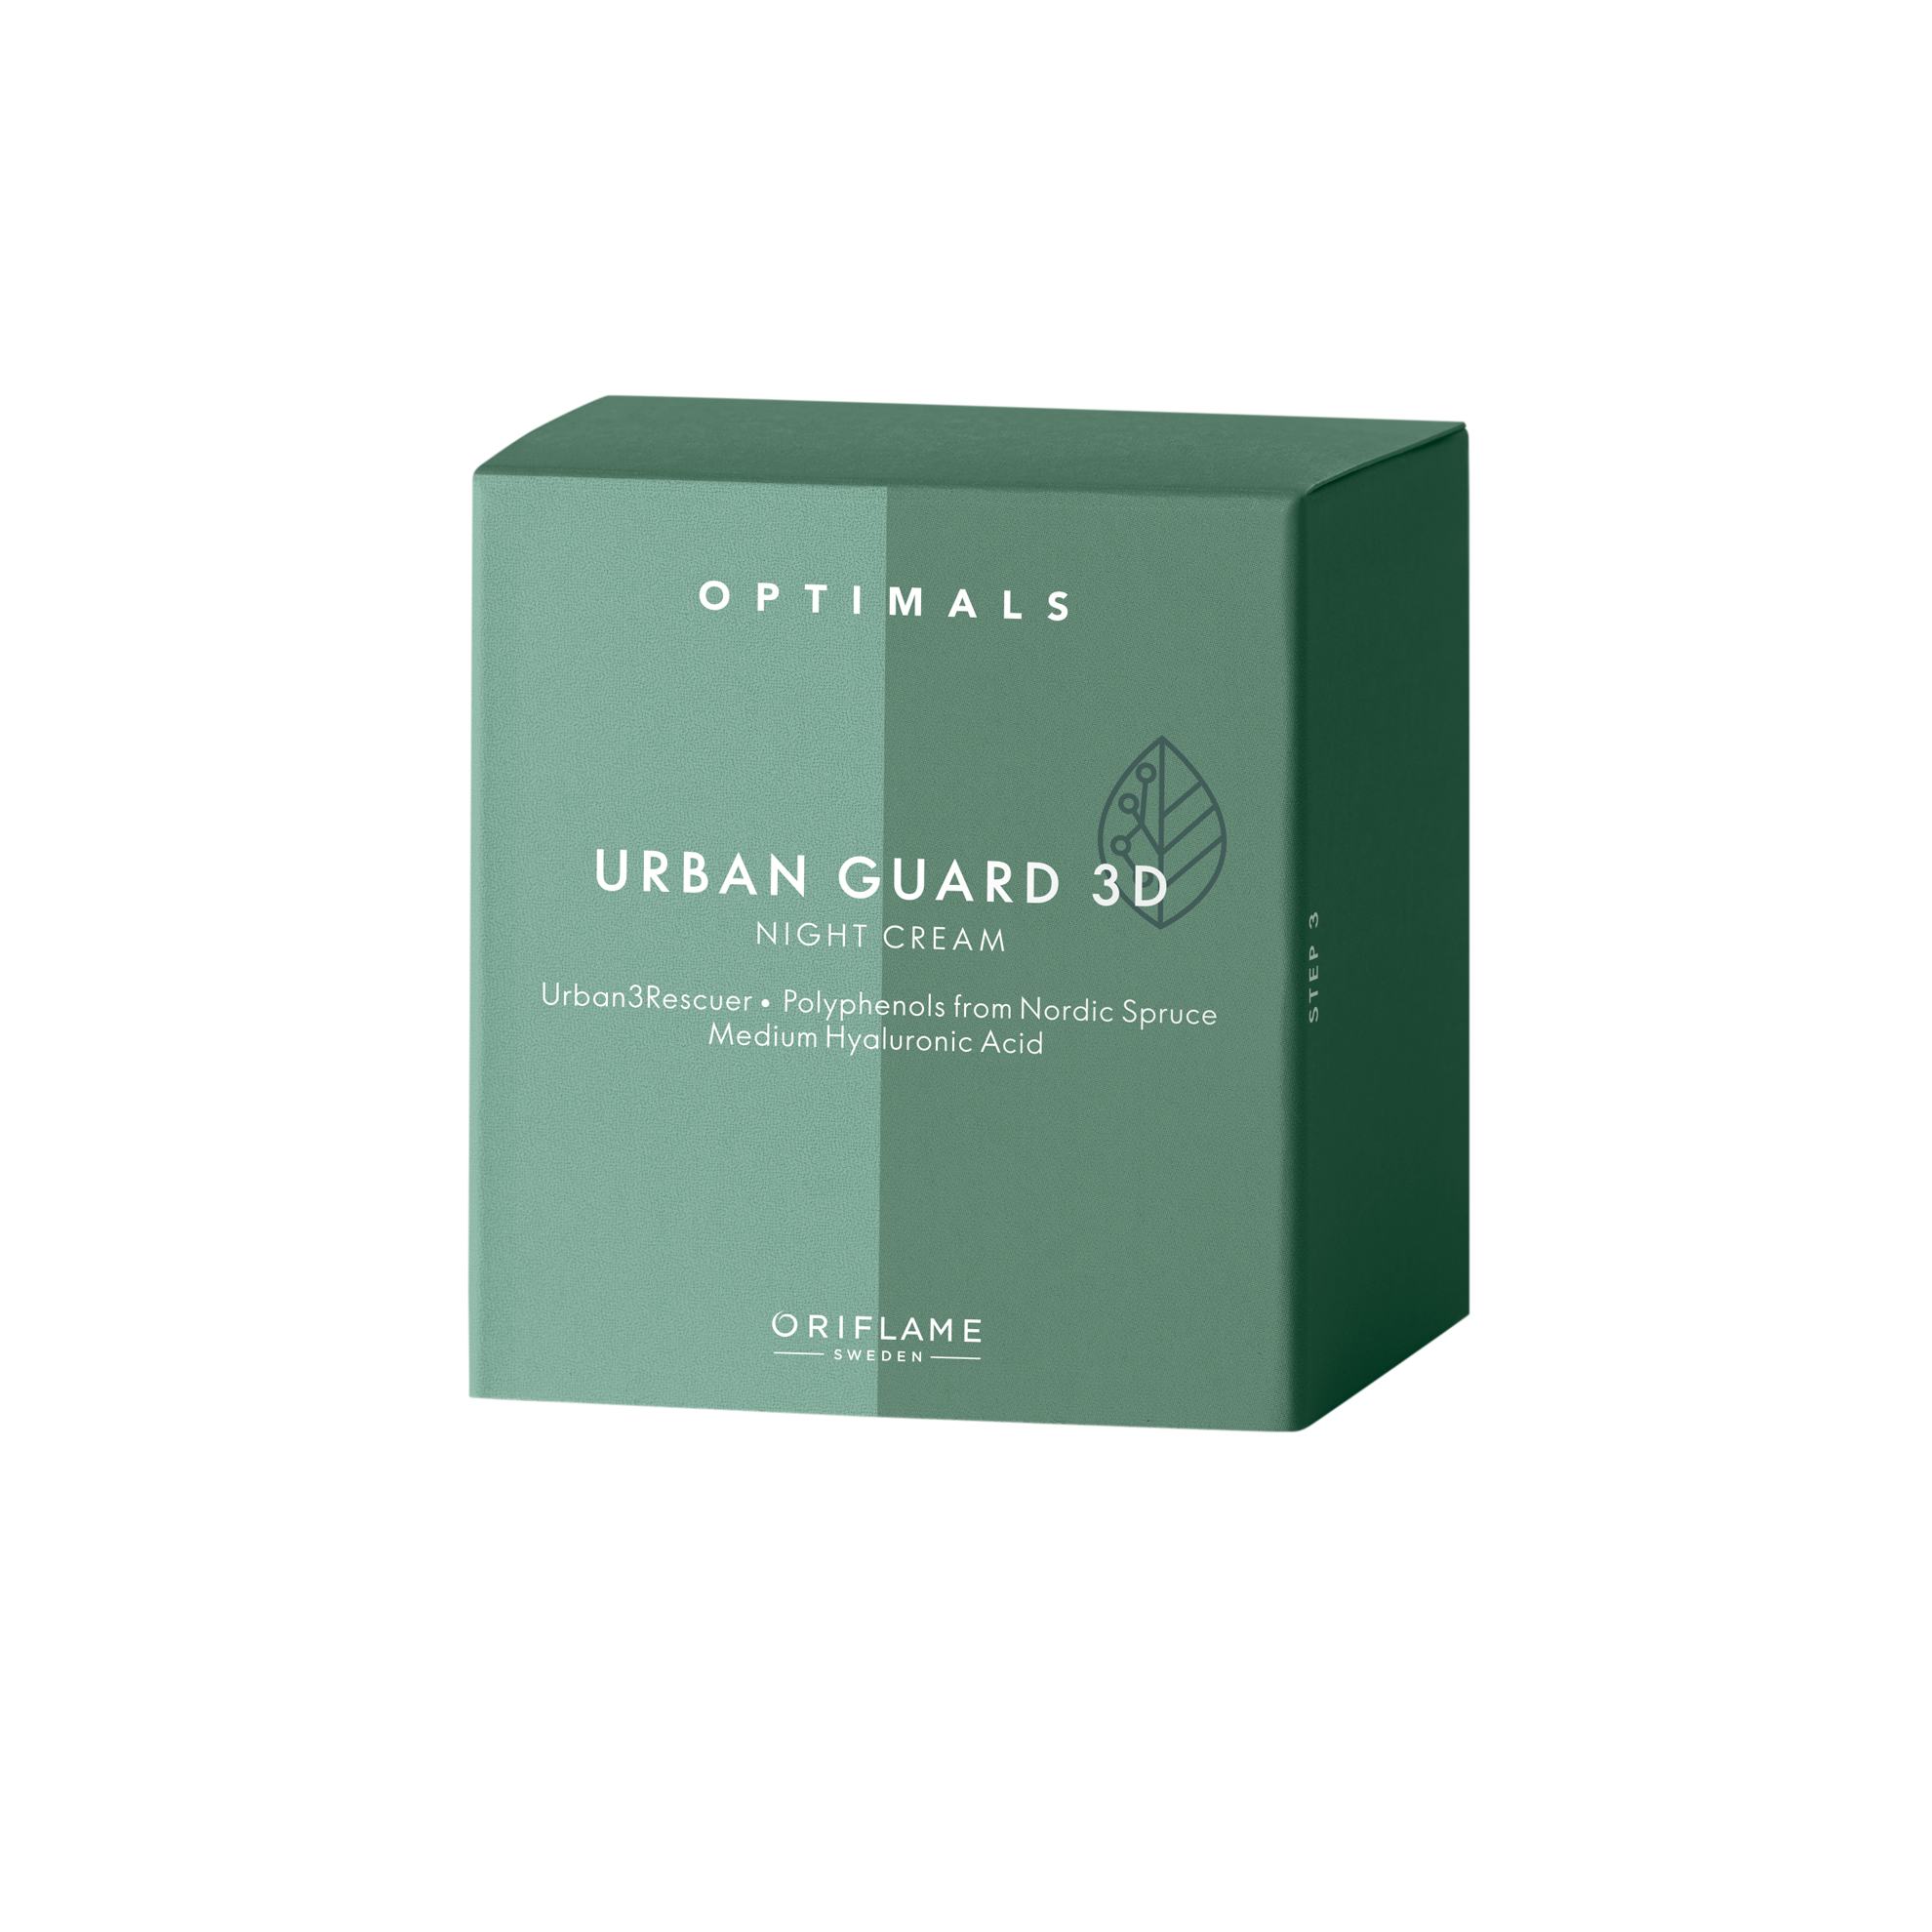 https://media-cdn.oriflame.com/productImage?externalMediaId=product-management-media%2fProducts%2f44260%2fUA%2f44260_1.png&id=15186919&version=1